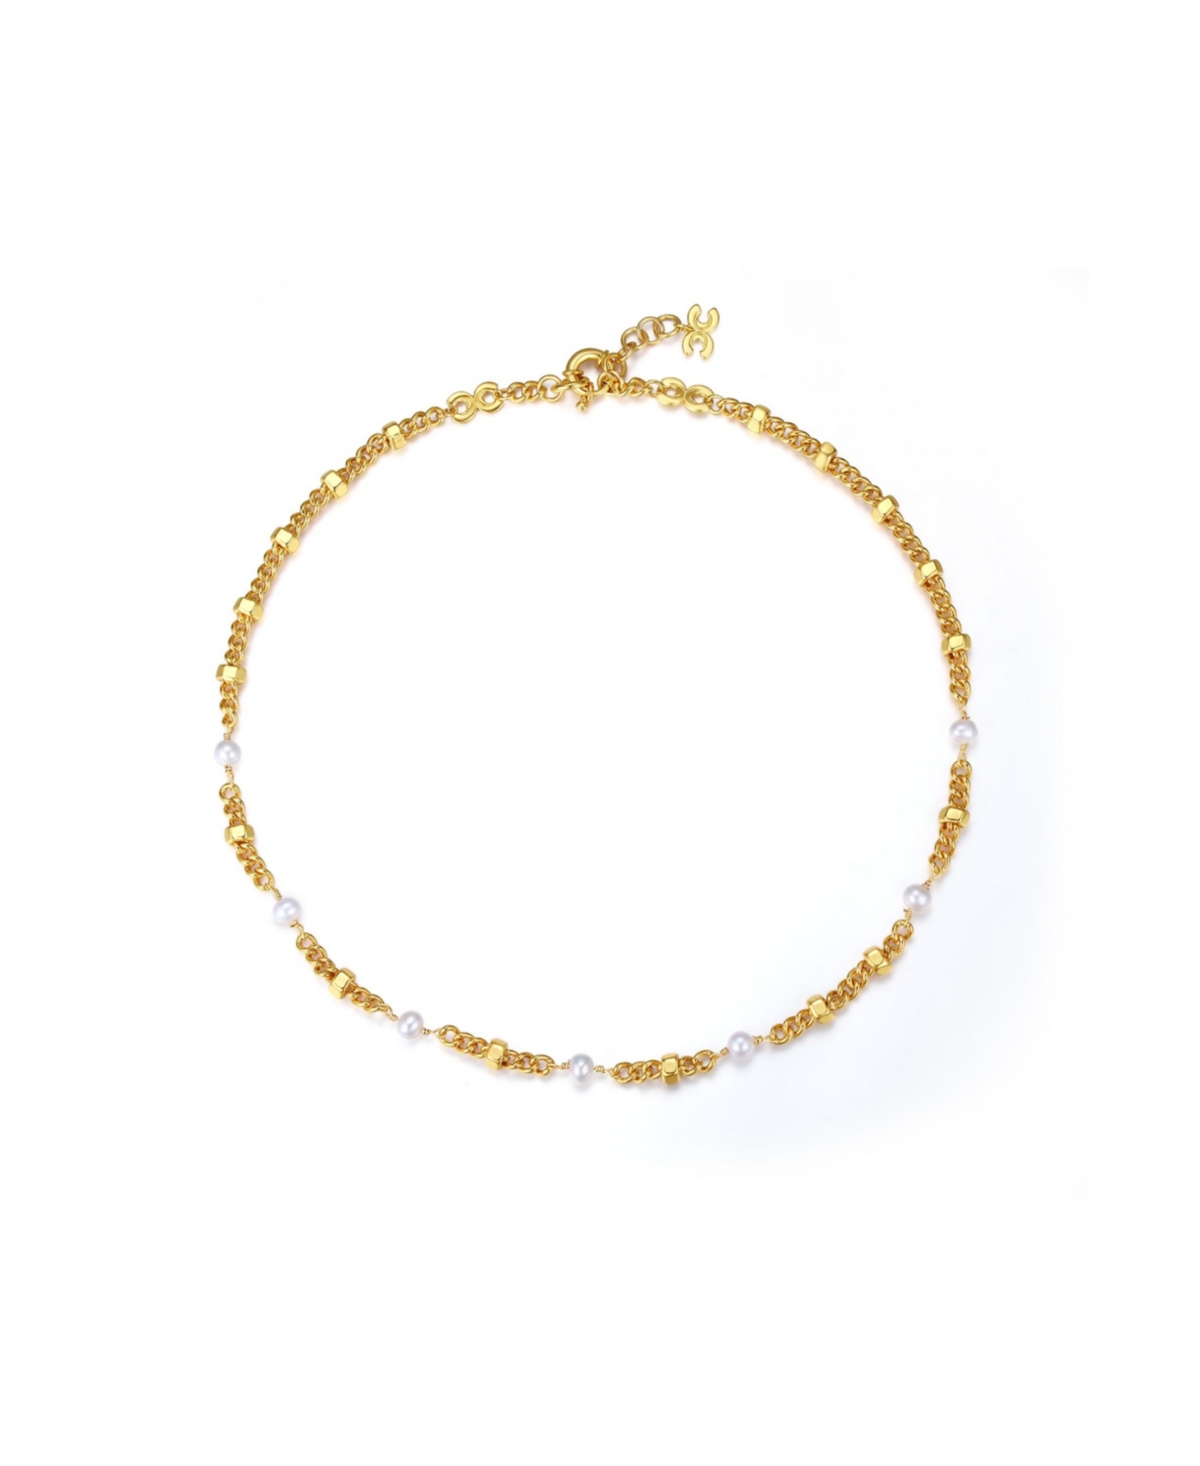 Hexagon Bead Necklace With Freshwater Pearls - Gold